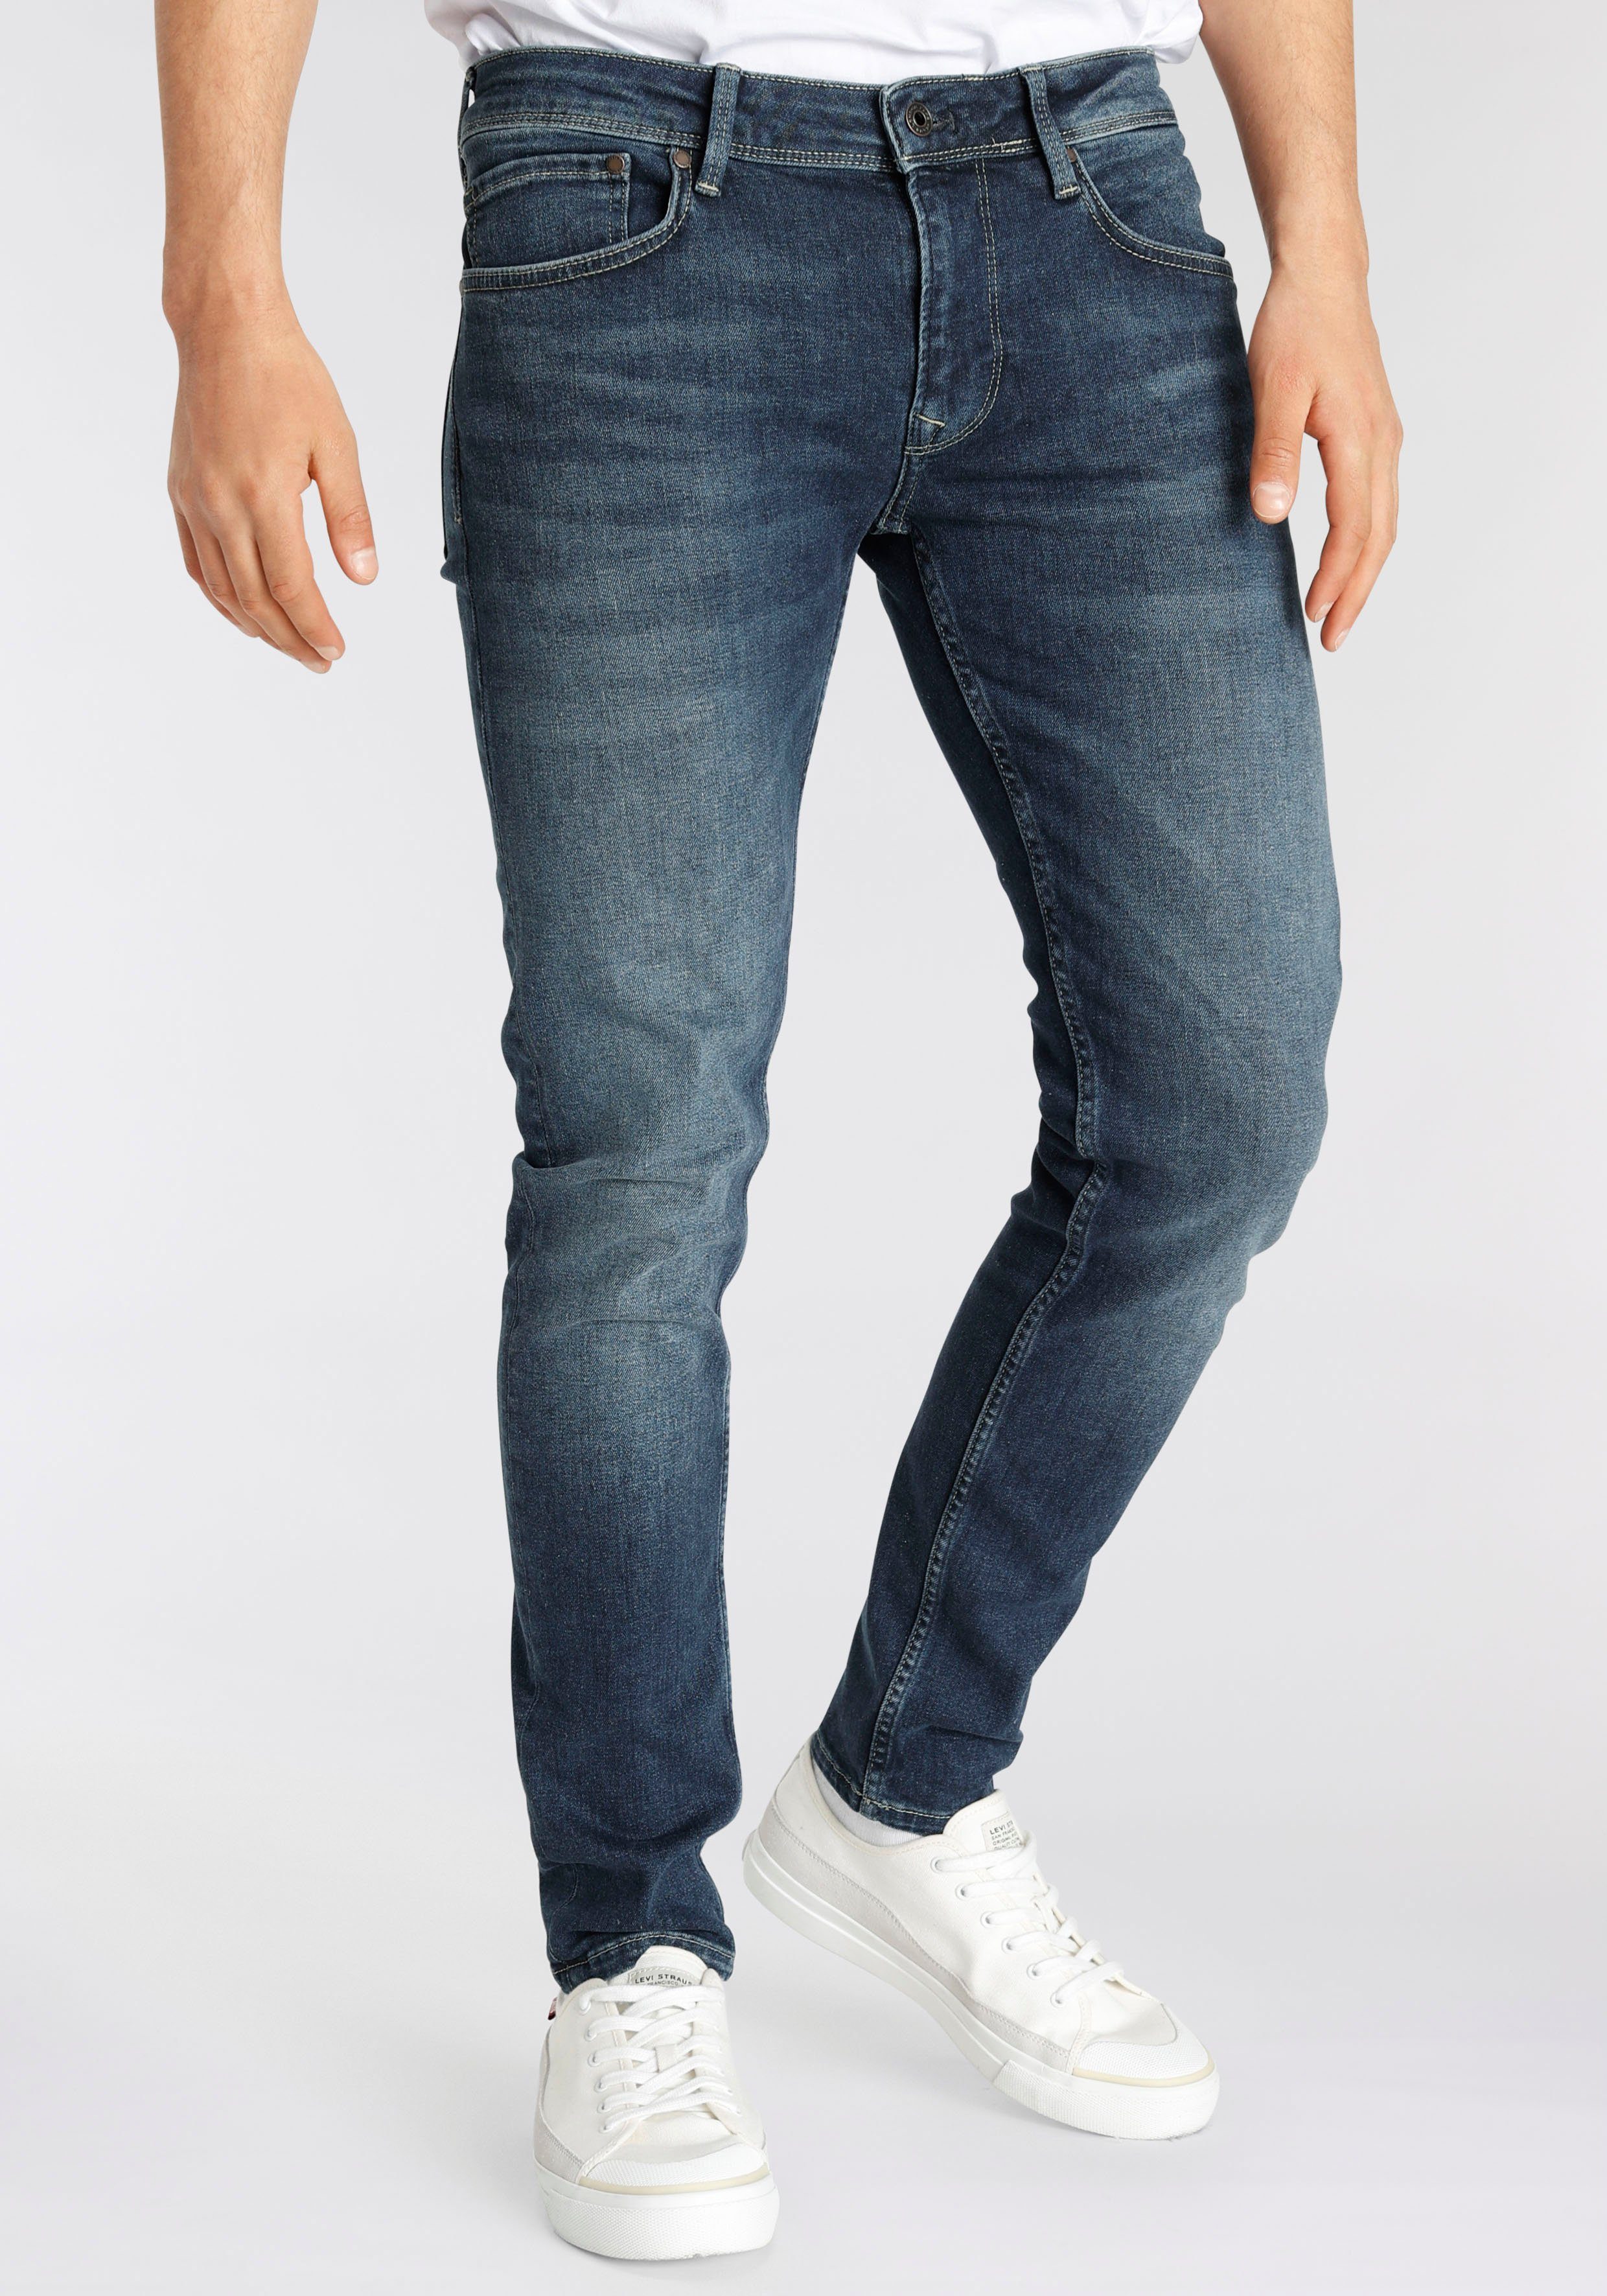 Pepe Jeans Skinny-fit-Jeans Finsbury